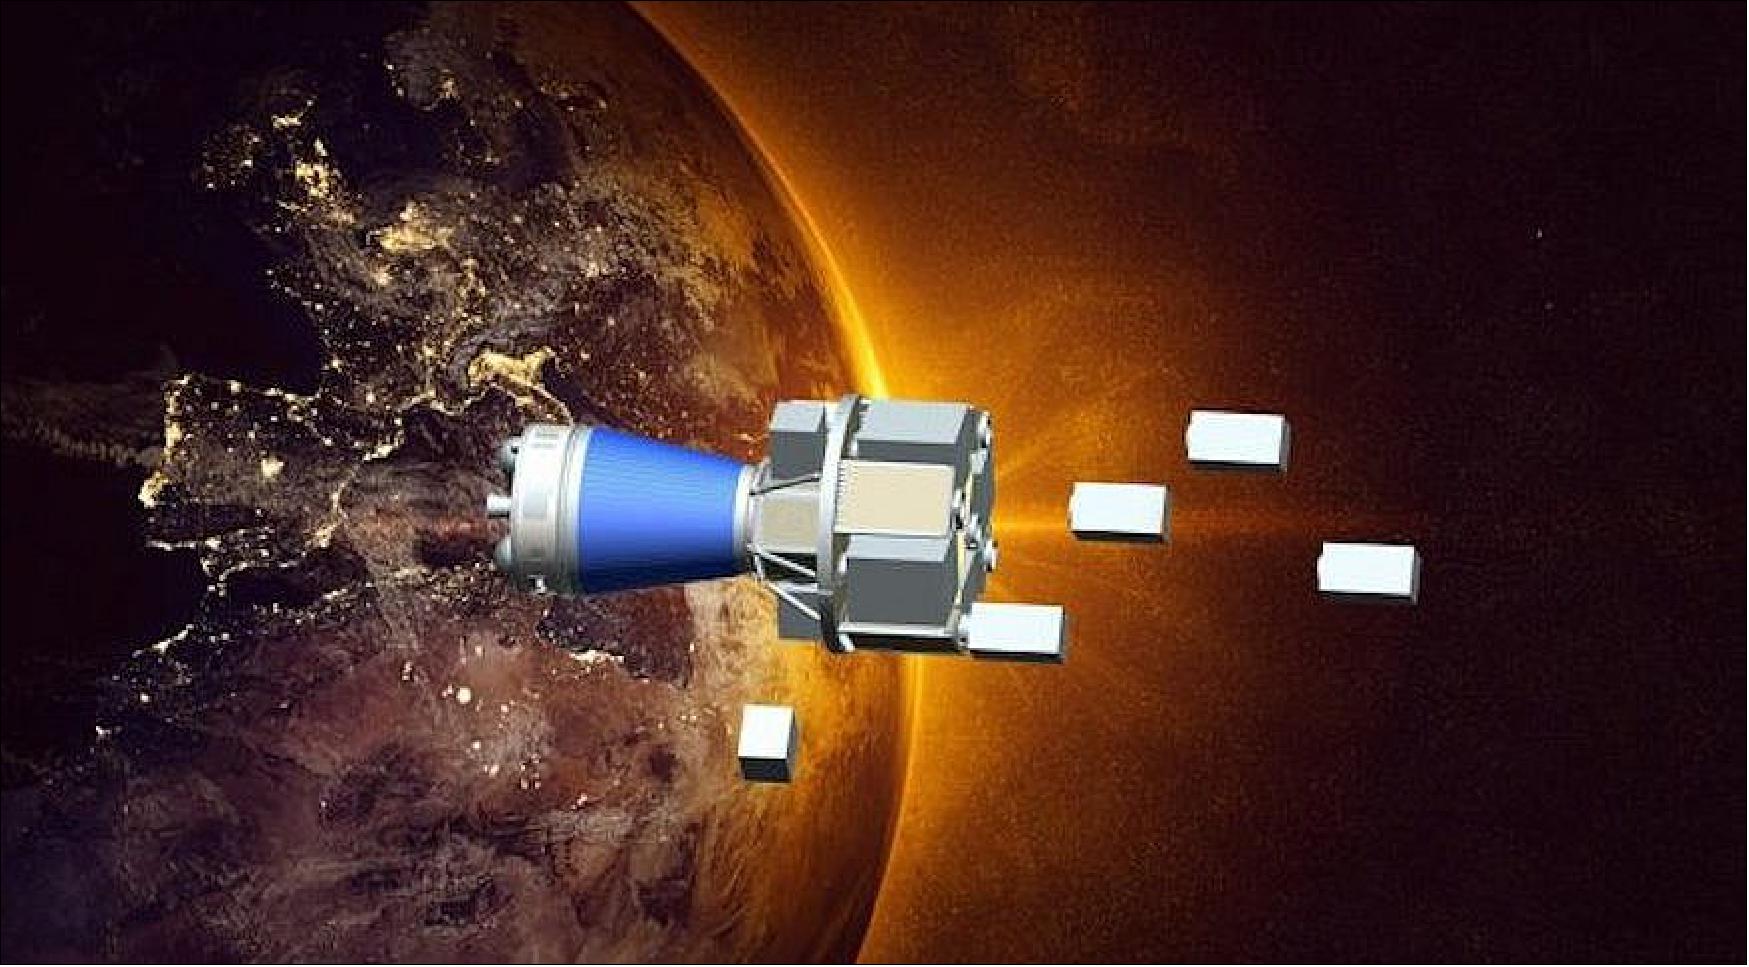 Figure 19: Artist's rendition of Vega deploying multiple smallsats using the SSMS (Small Spacecraft Mission Service) adapter (image credit: European Space Agency.)